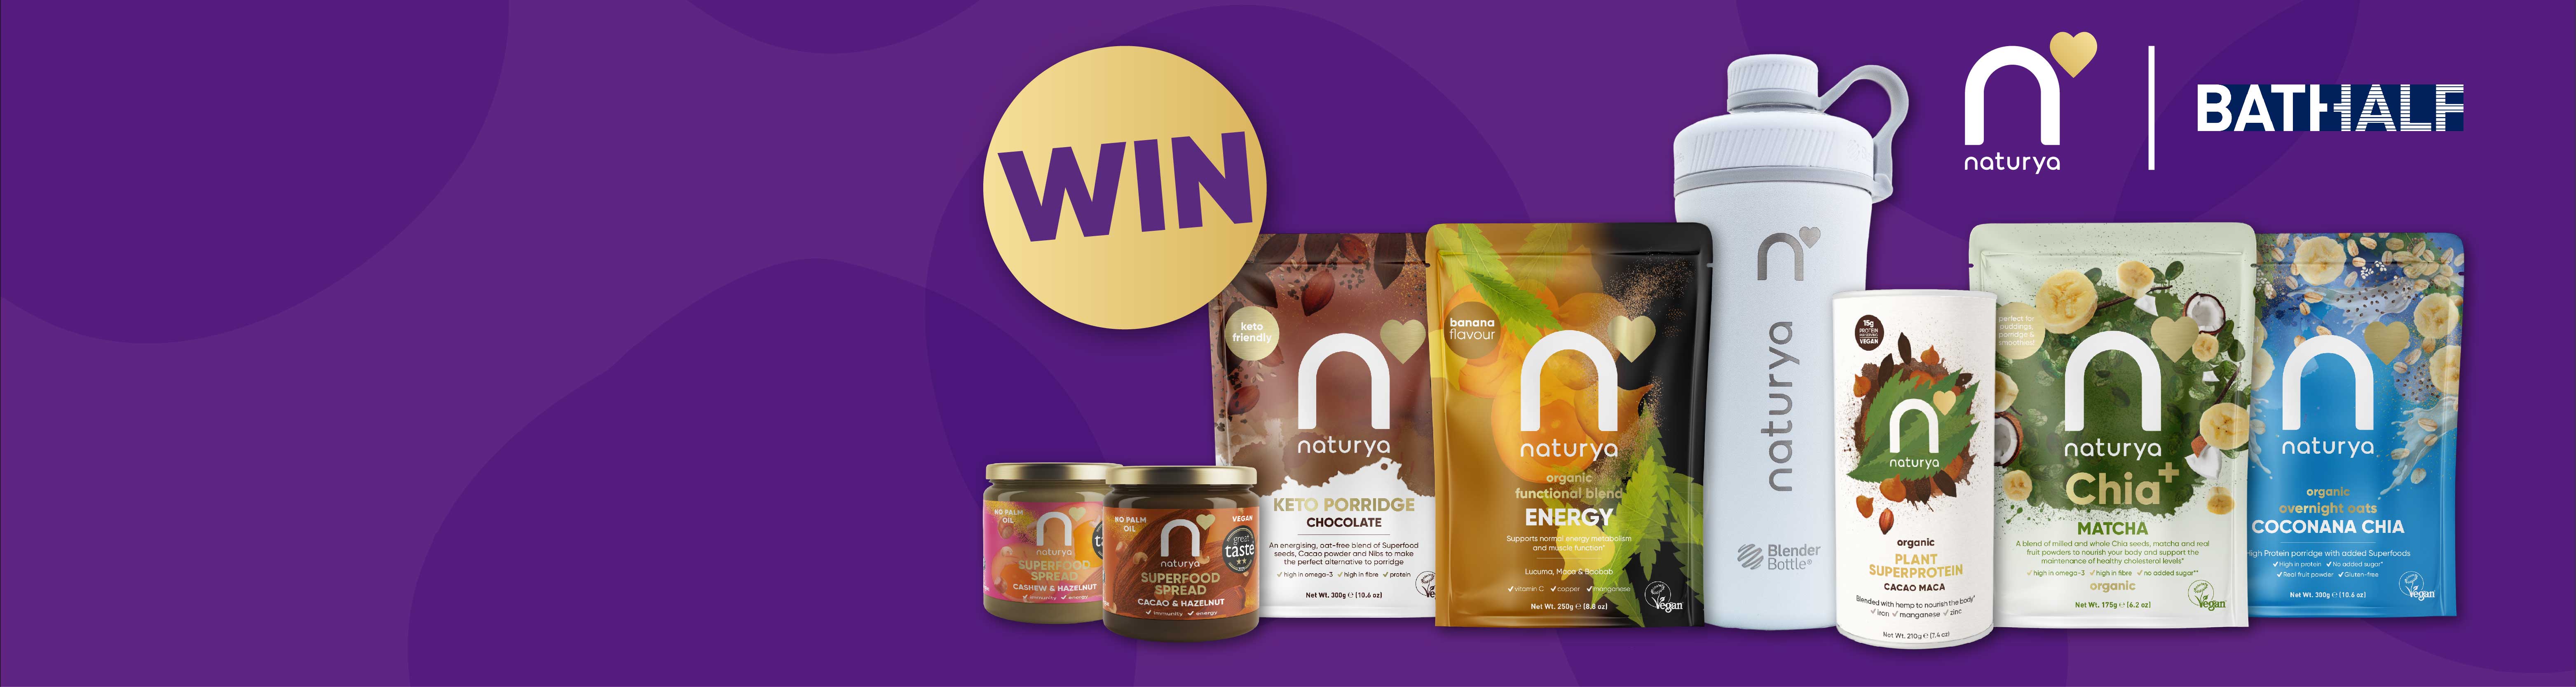 win a free entry in Bath Half Marathon 2022 and a Naturya superfood bundle worth over £150 including everything you need to fuel pre and post run and achieve maximum performance